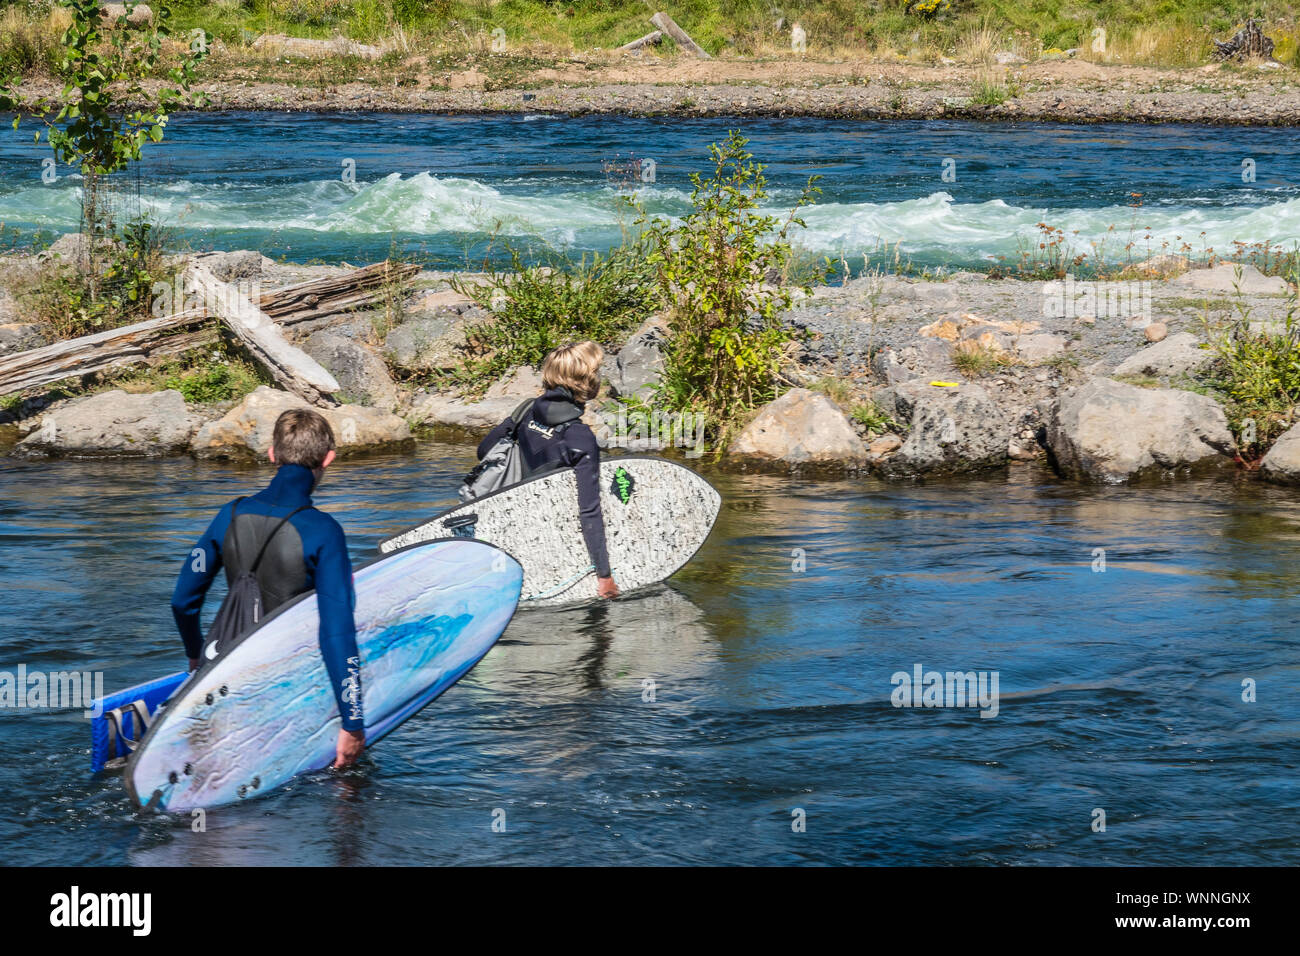 Two teenage river surfers carry their surf boards and cross part of the Deschutes River to get to the surfing spot in the river. Stock Photo